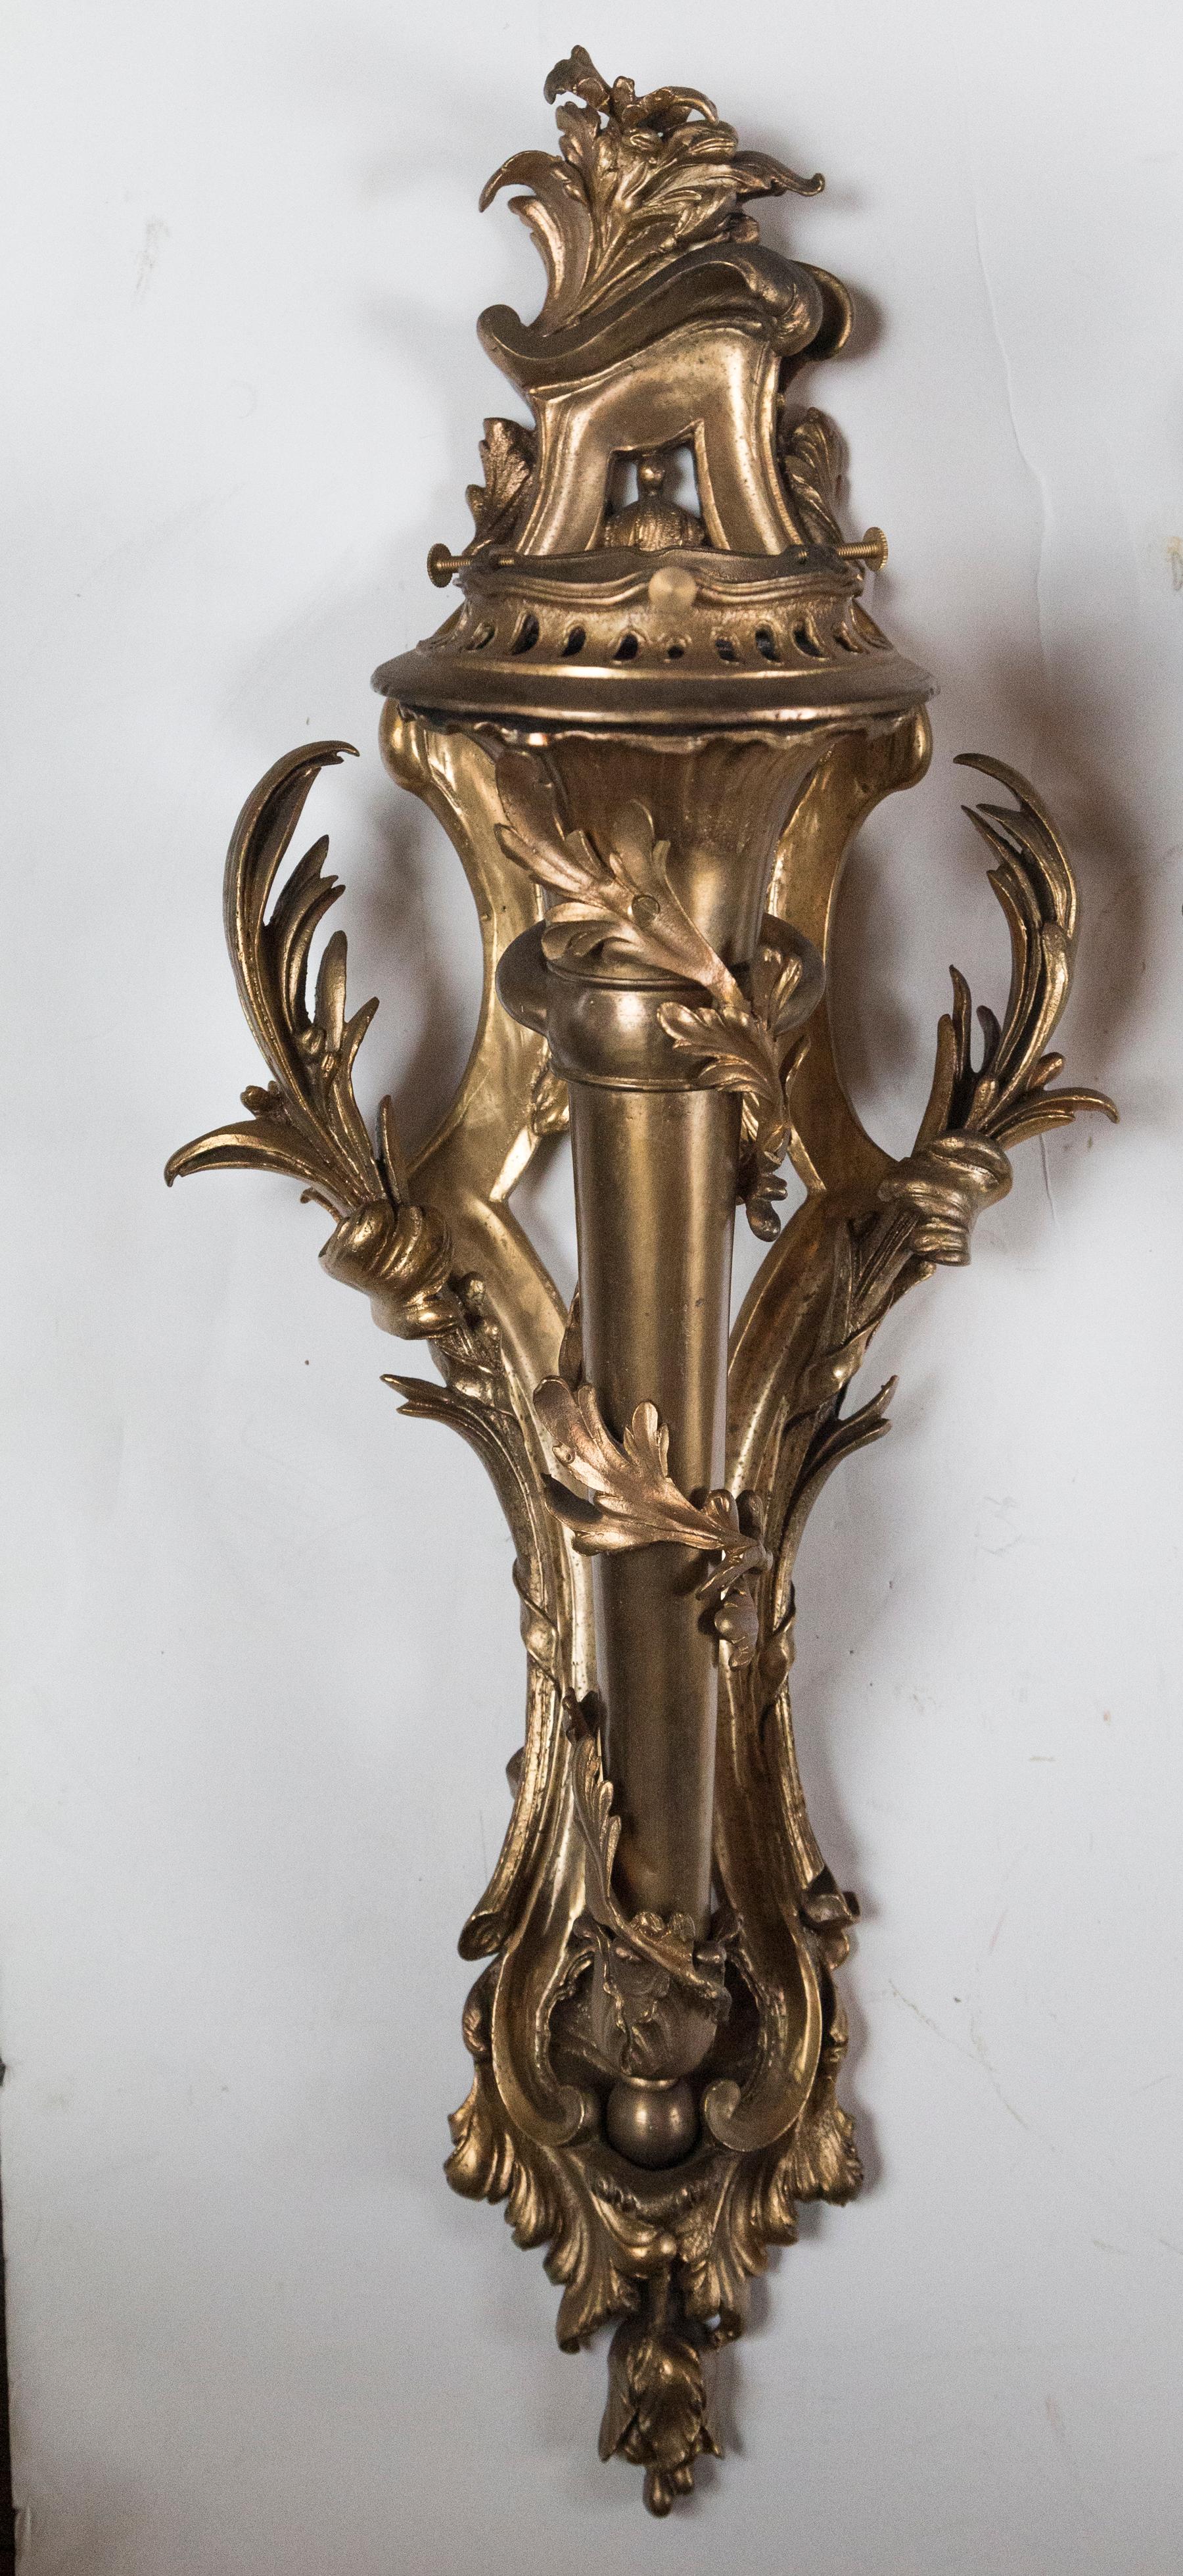 The gilding in antique gold color. Each in the form of a torch., encircled with an wreath of acanthus leaves. Leaf adornments to the top and bottom, with splayed out leafy arms on either side. The central mounting is part of the sconce. unwired.